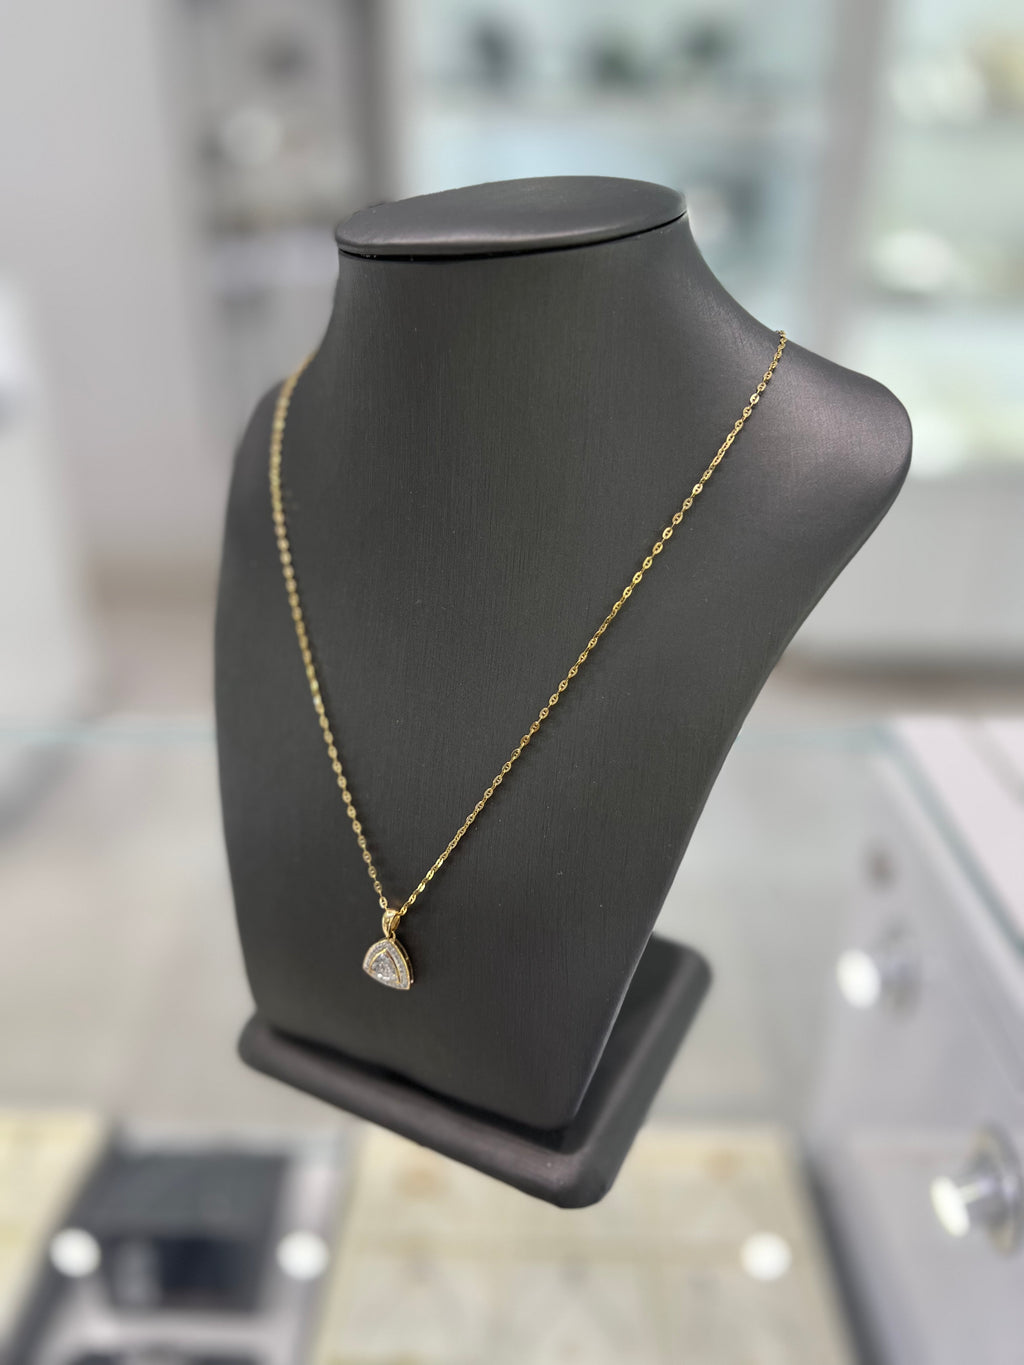 14kt Yellow Gold Diamond Pendant With 10kt Chain Necklace